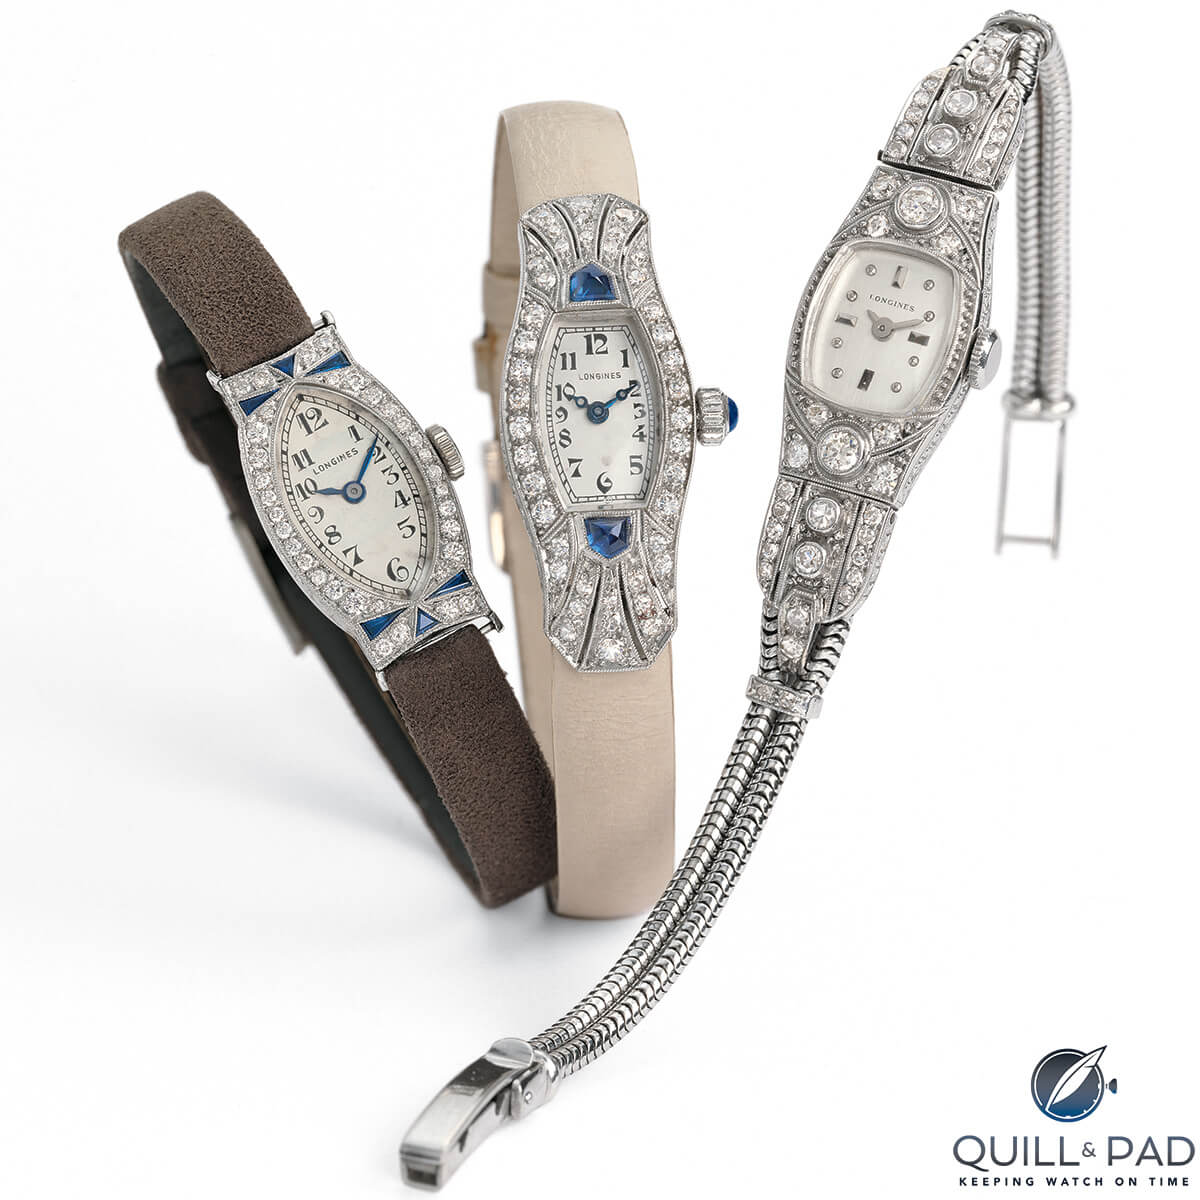 A trio of Longines ladies’ watches from the 1920s